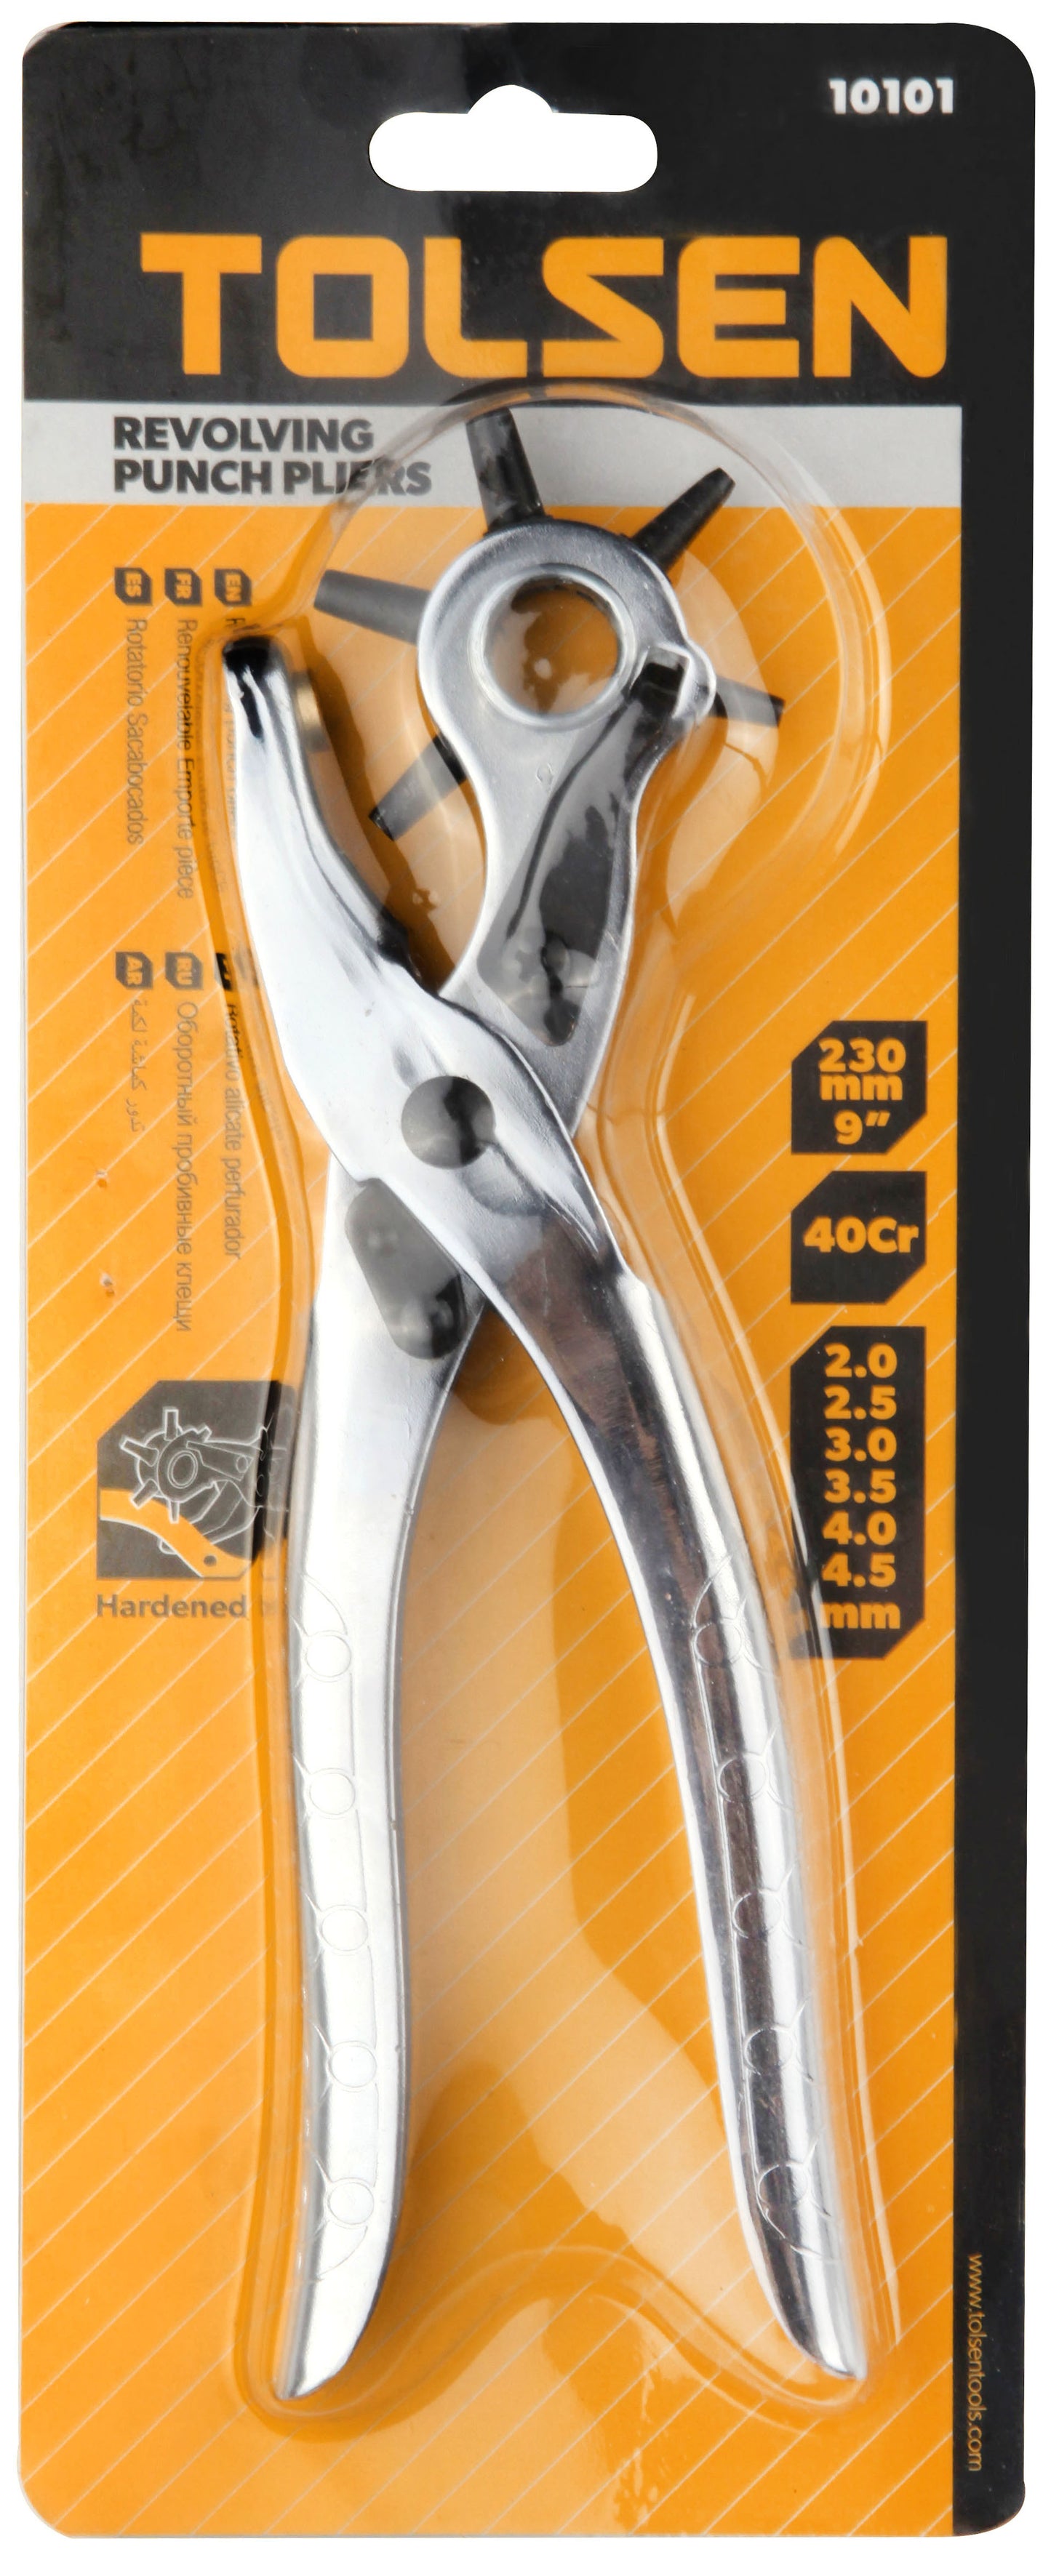 REVOLVING PUNCH PLIERS (9")